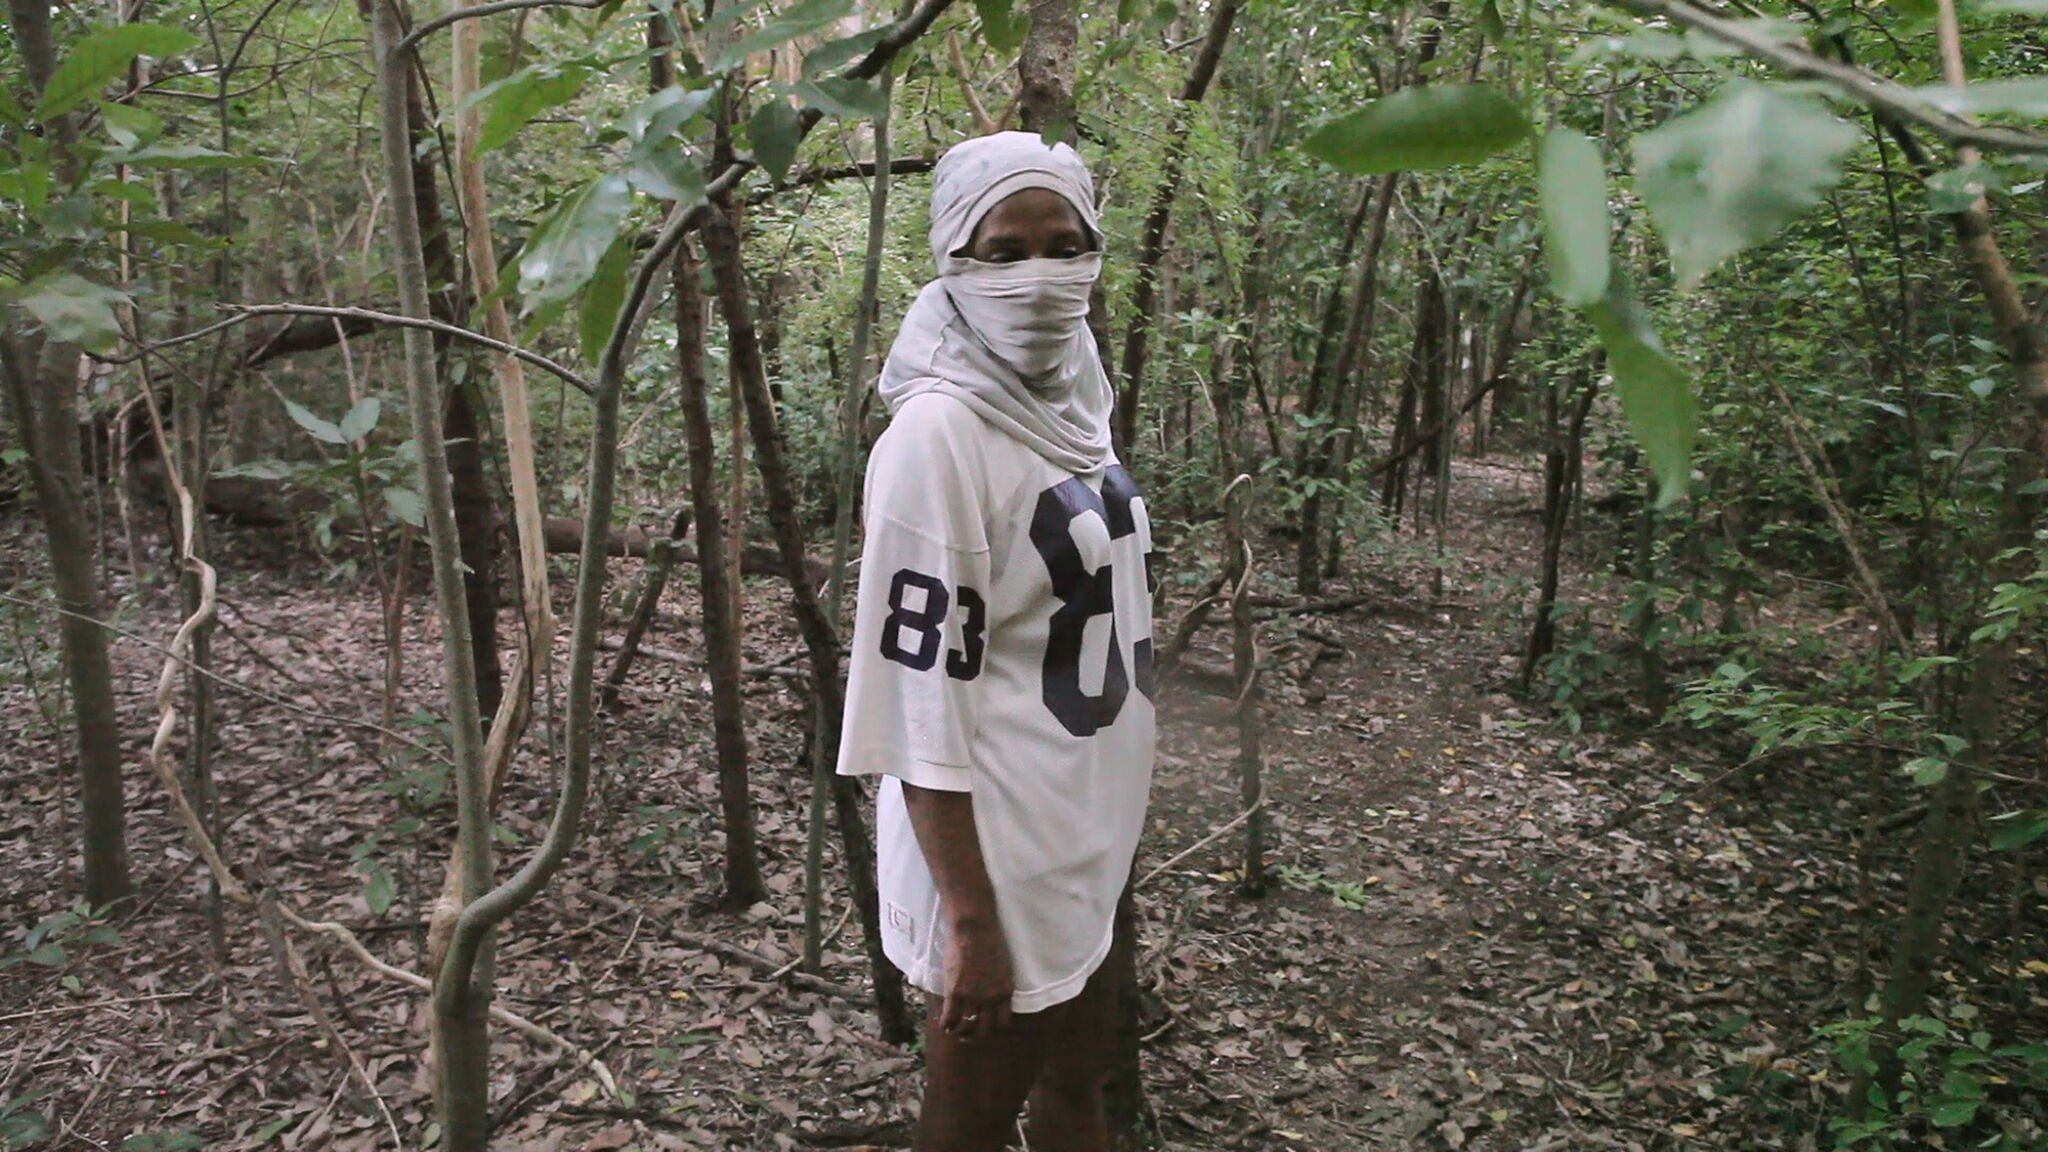 A many in a wooded area faces the camera with his face covered in cloth. 